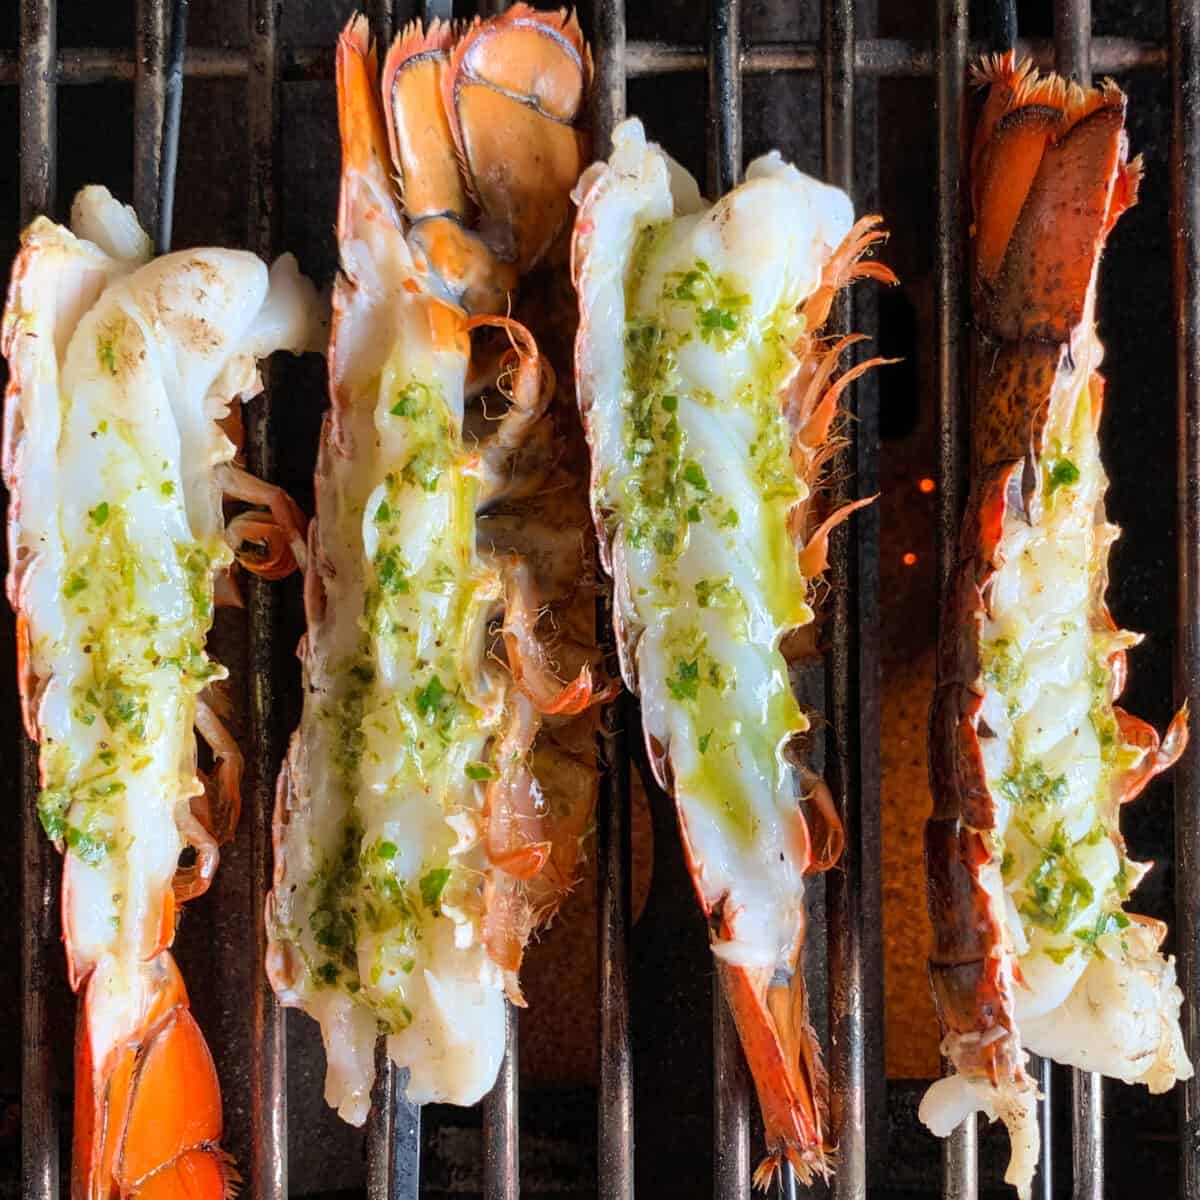 Four split & skewered lobster tails on the grill with a butter sauce.